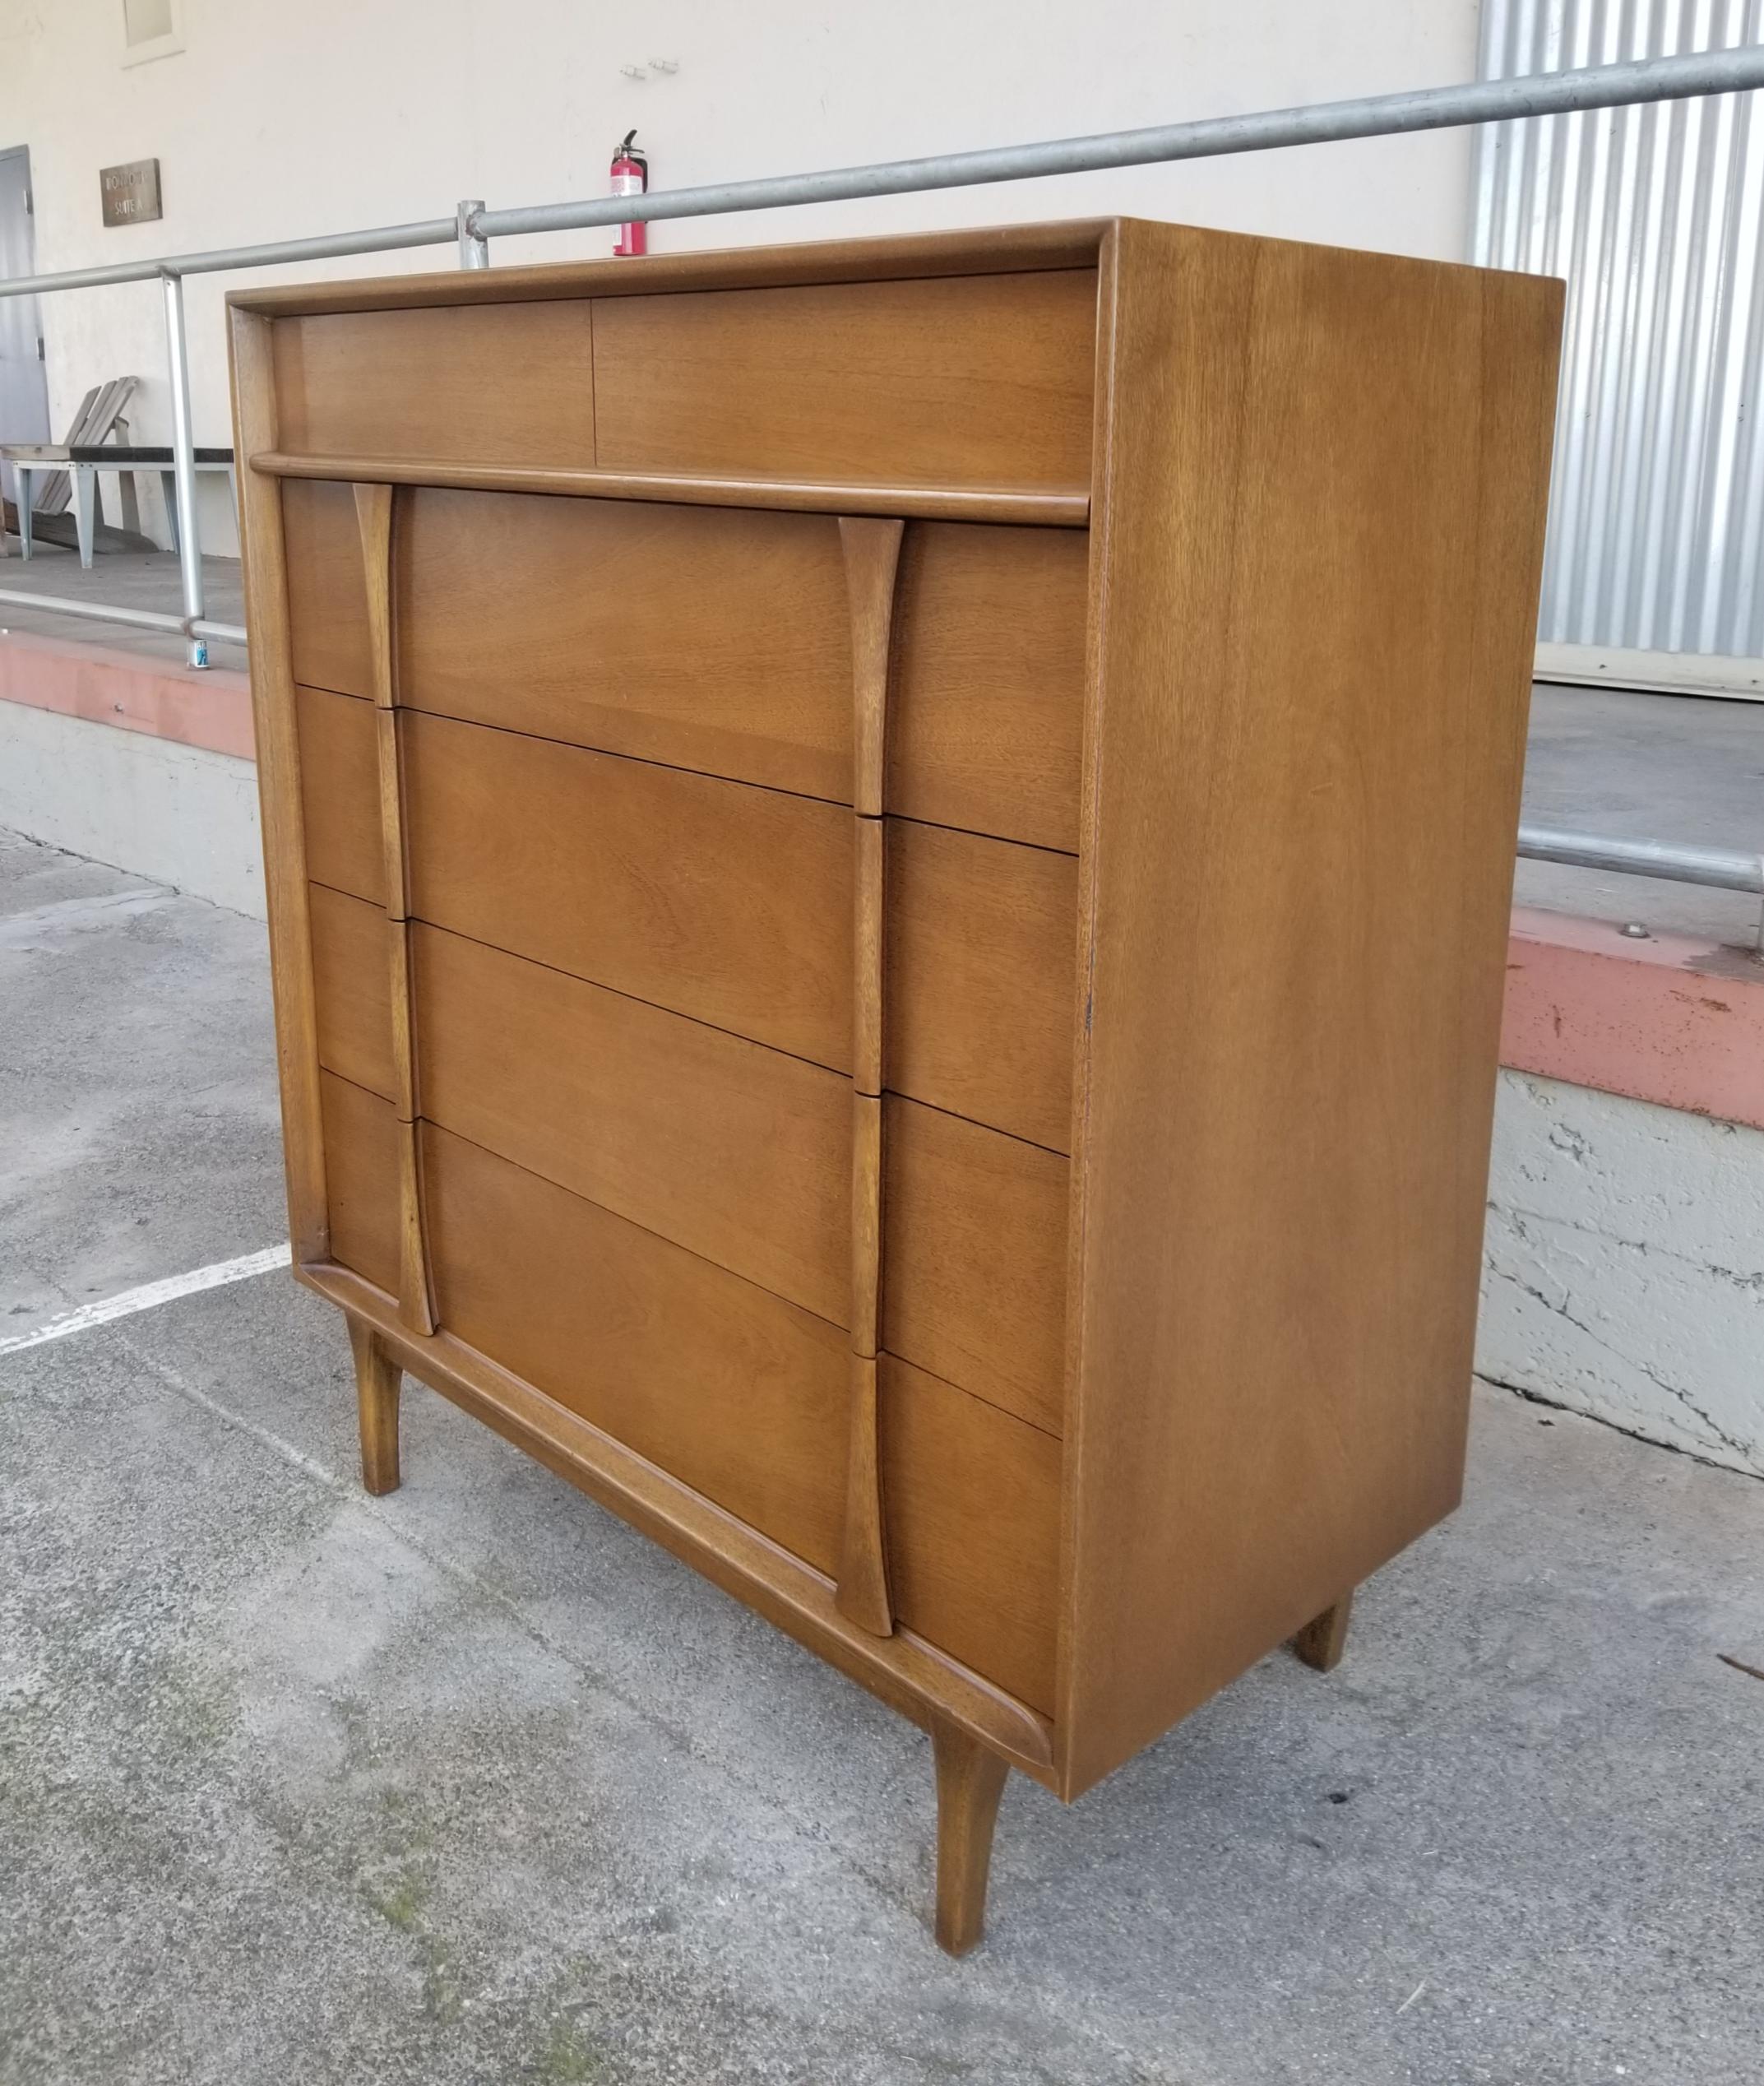 Fine craftsmanship and materials in this over-sized Mid-Century Modern highboy dresser by Red Lion Table Company, circa 1950s. Hourglass sculptural design. Solid oak dovetailed secondary woods. Center glides with wood dust panel between each drawer.